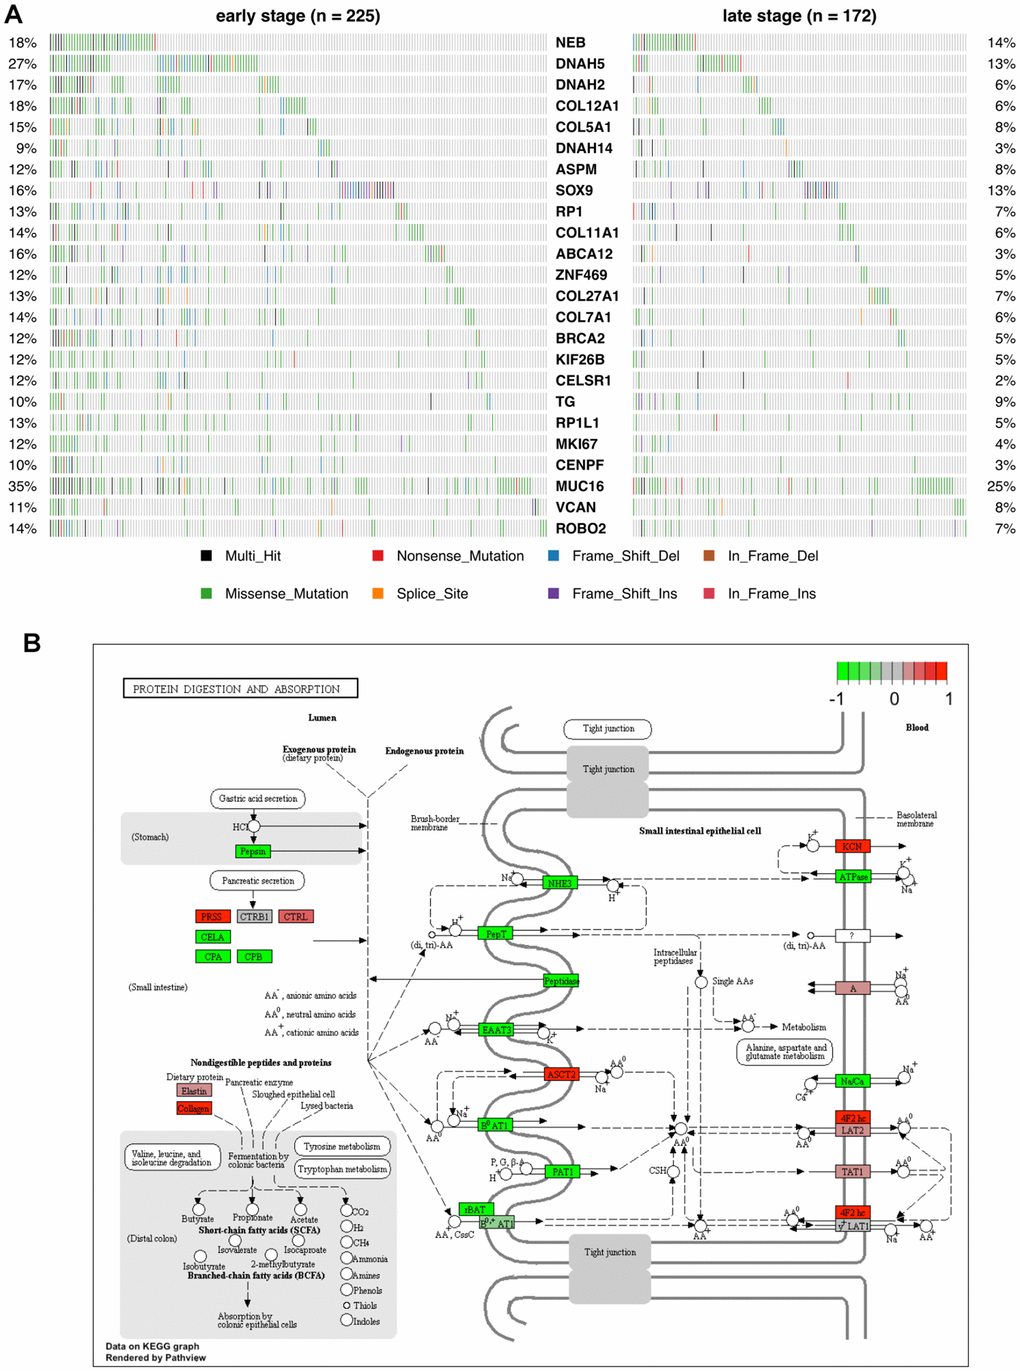 Mutational profile and KEGG pathway analysis of candidate COAD neoantigen-related DEGs. (A) Mutation frequency data. The percentage of patients harboring the color-coded variations listed at the bottom are indicated on the left and right sides. (B) KEGG pathways enriched in the 24 candidate neoantigen-related genes. Red and green boxes indicate up- and down-regulated genes, respectively.